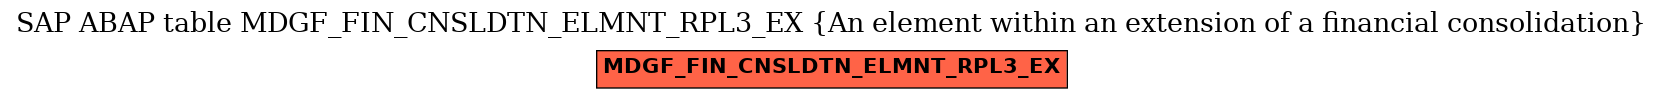 E-R Diagram for table MDGF_FIN_CNSLDTN_ELMNT_RPL3_EX (An element within an extension of a financial consolidation)